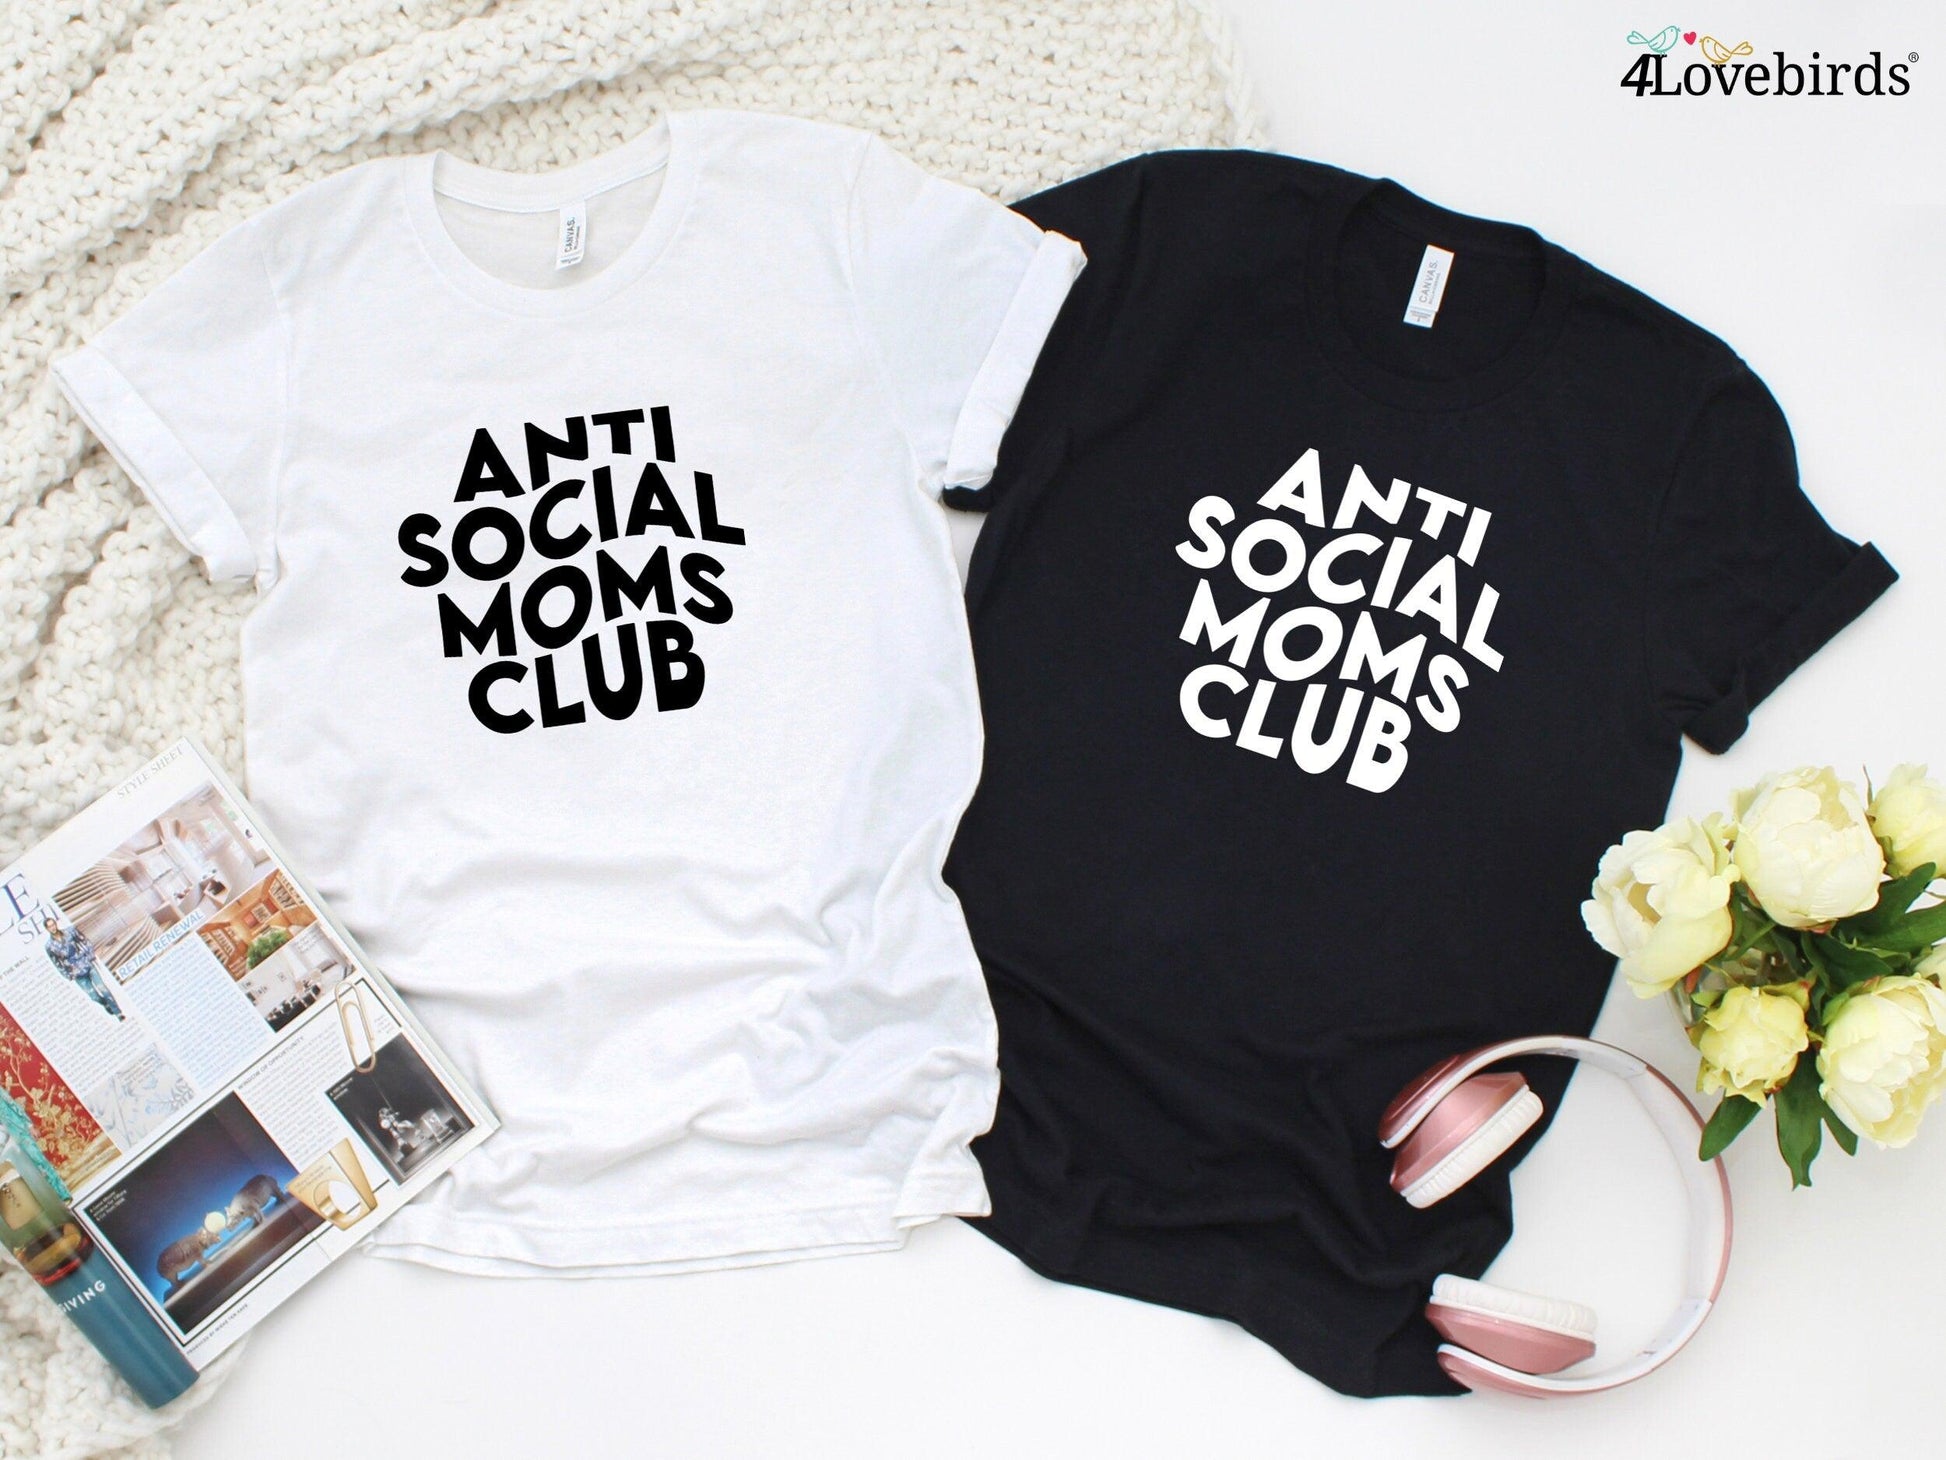 Anti Social Moms Club Hoodie // Mothers Day Gift / Gift for Mom / Mama Sweatshirt / Mom Long Sleeve Shirt / Gift for Her / Birthday Gift - 4Lovebirds